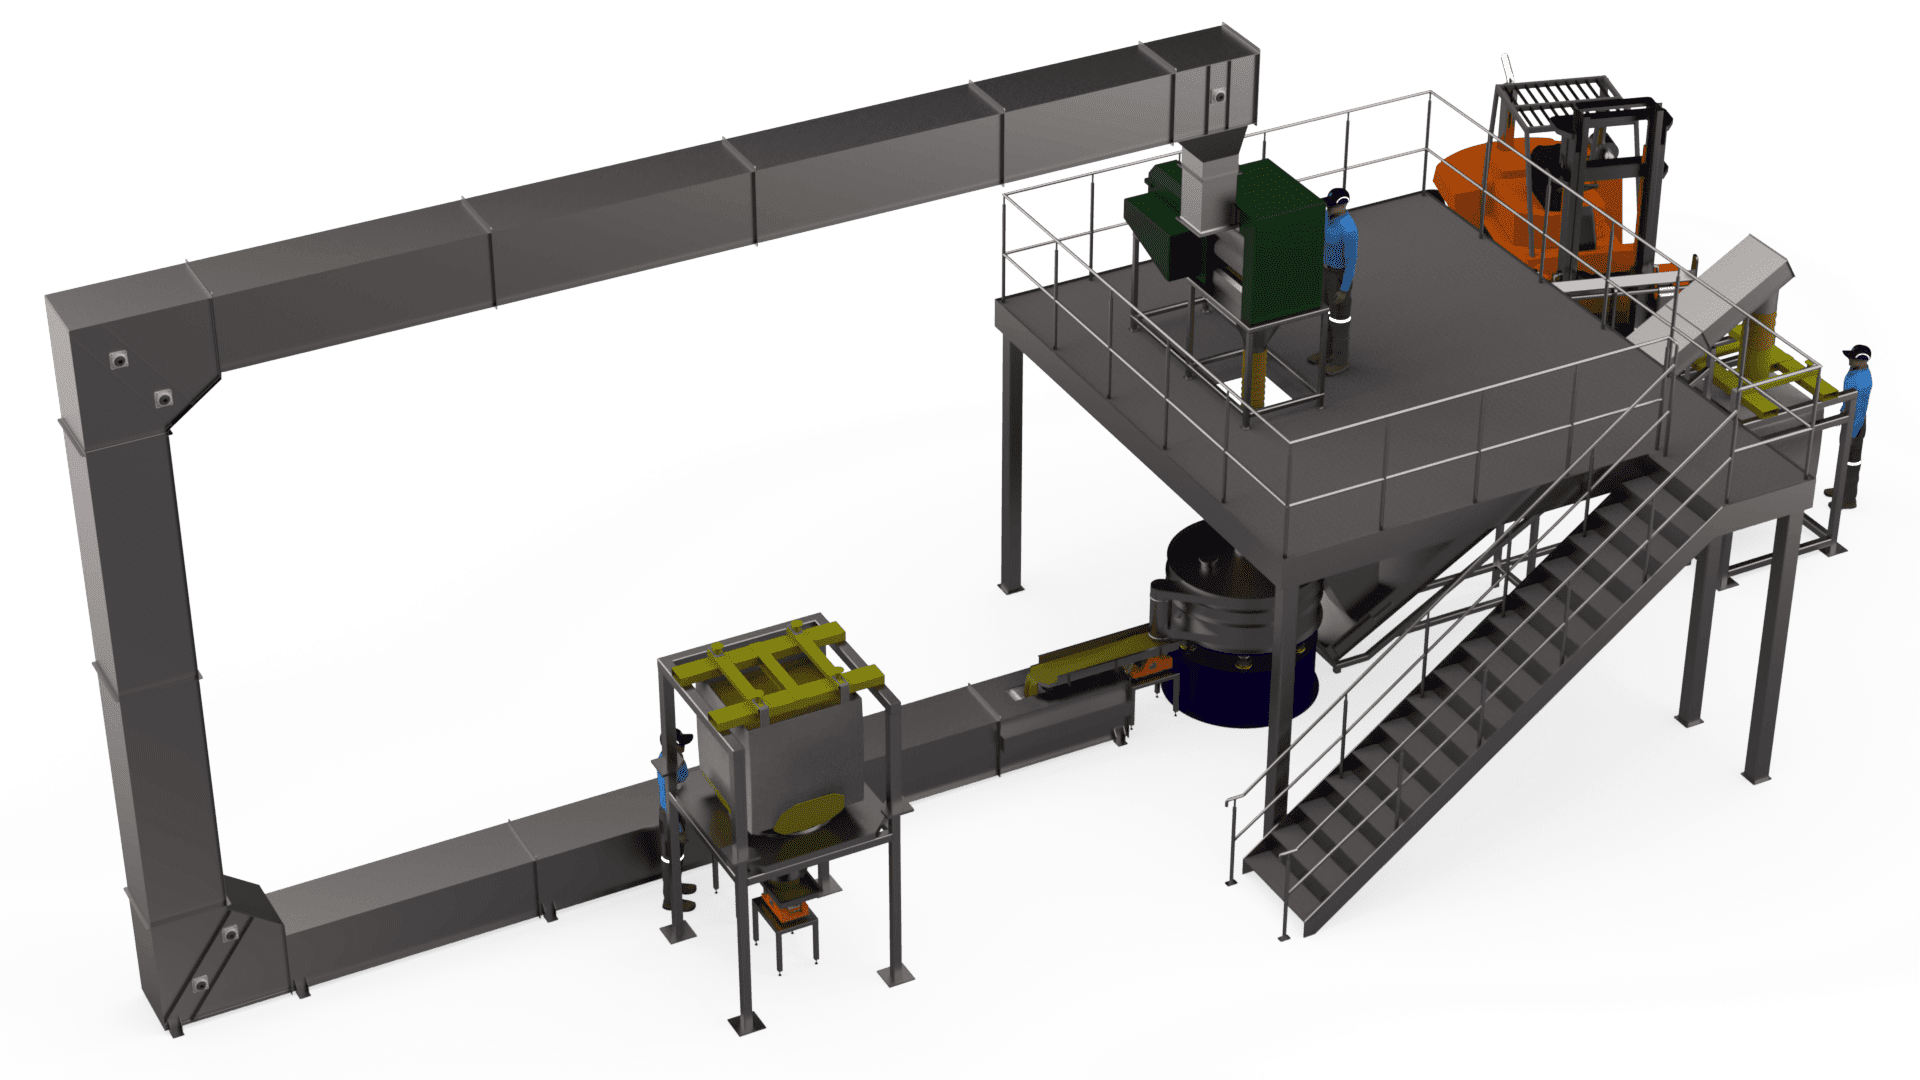 Gough 3D model of a bucket elevator conveying system.